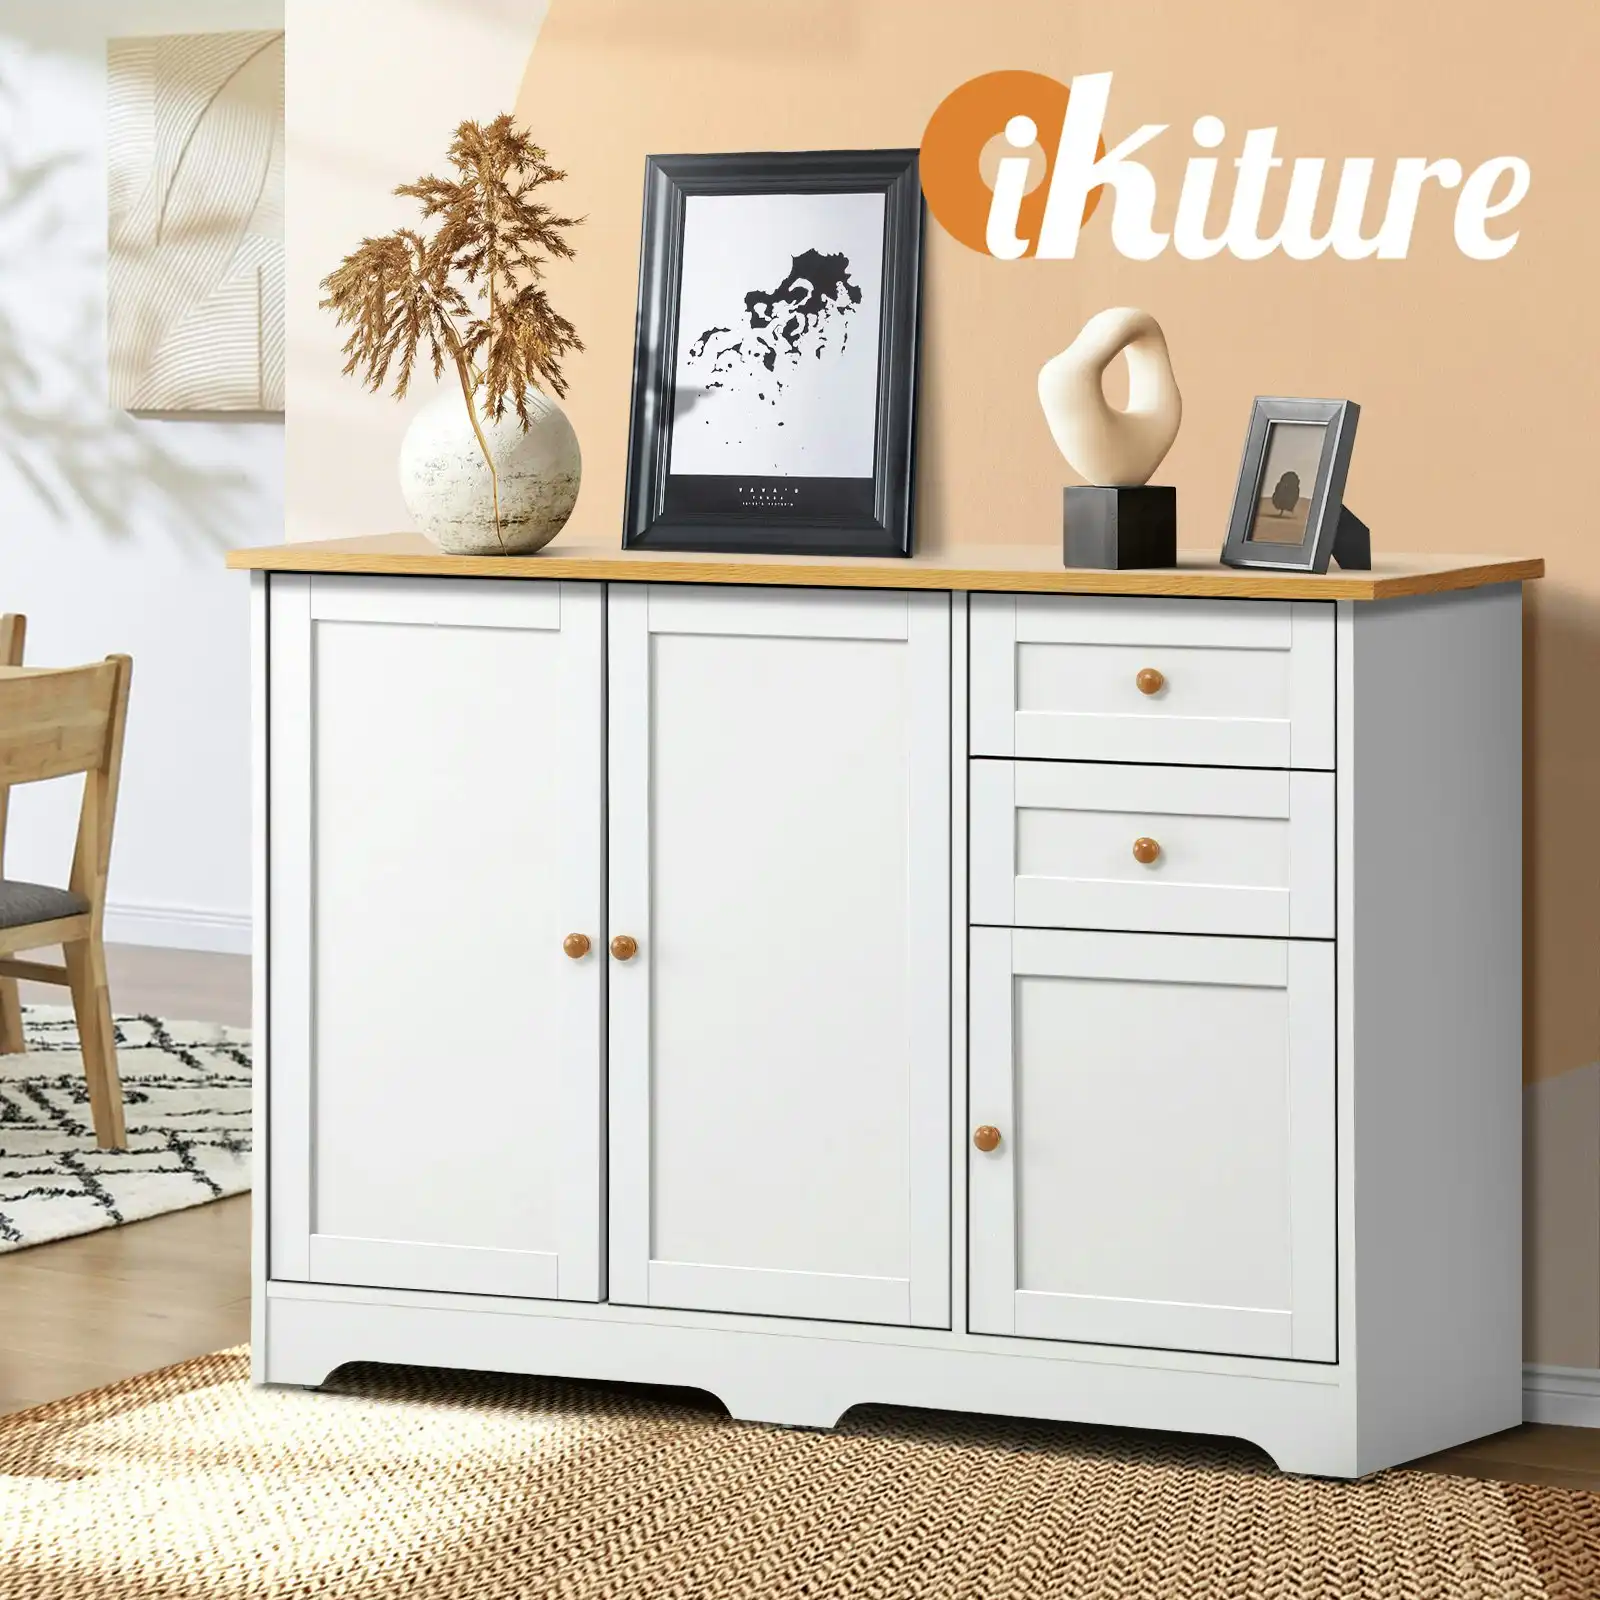 Oikiture Buffet Sideboard Storage Cabinet Cupboard Hallway Kitchen Drawers Table